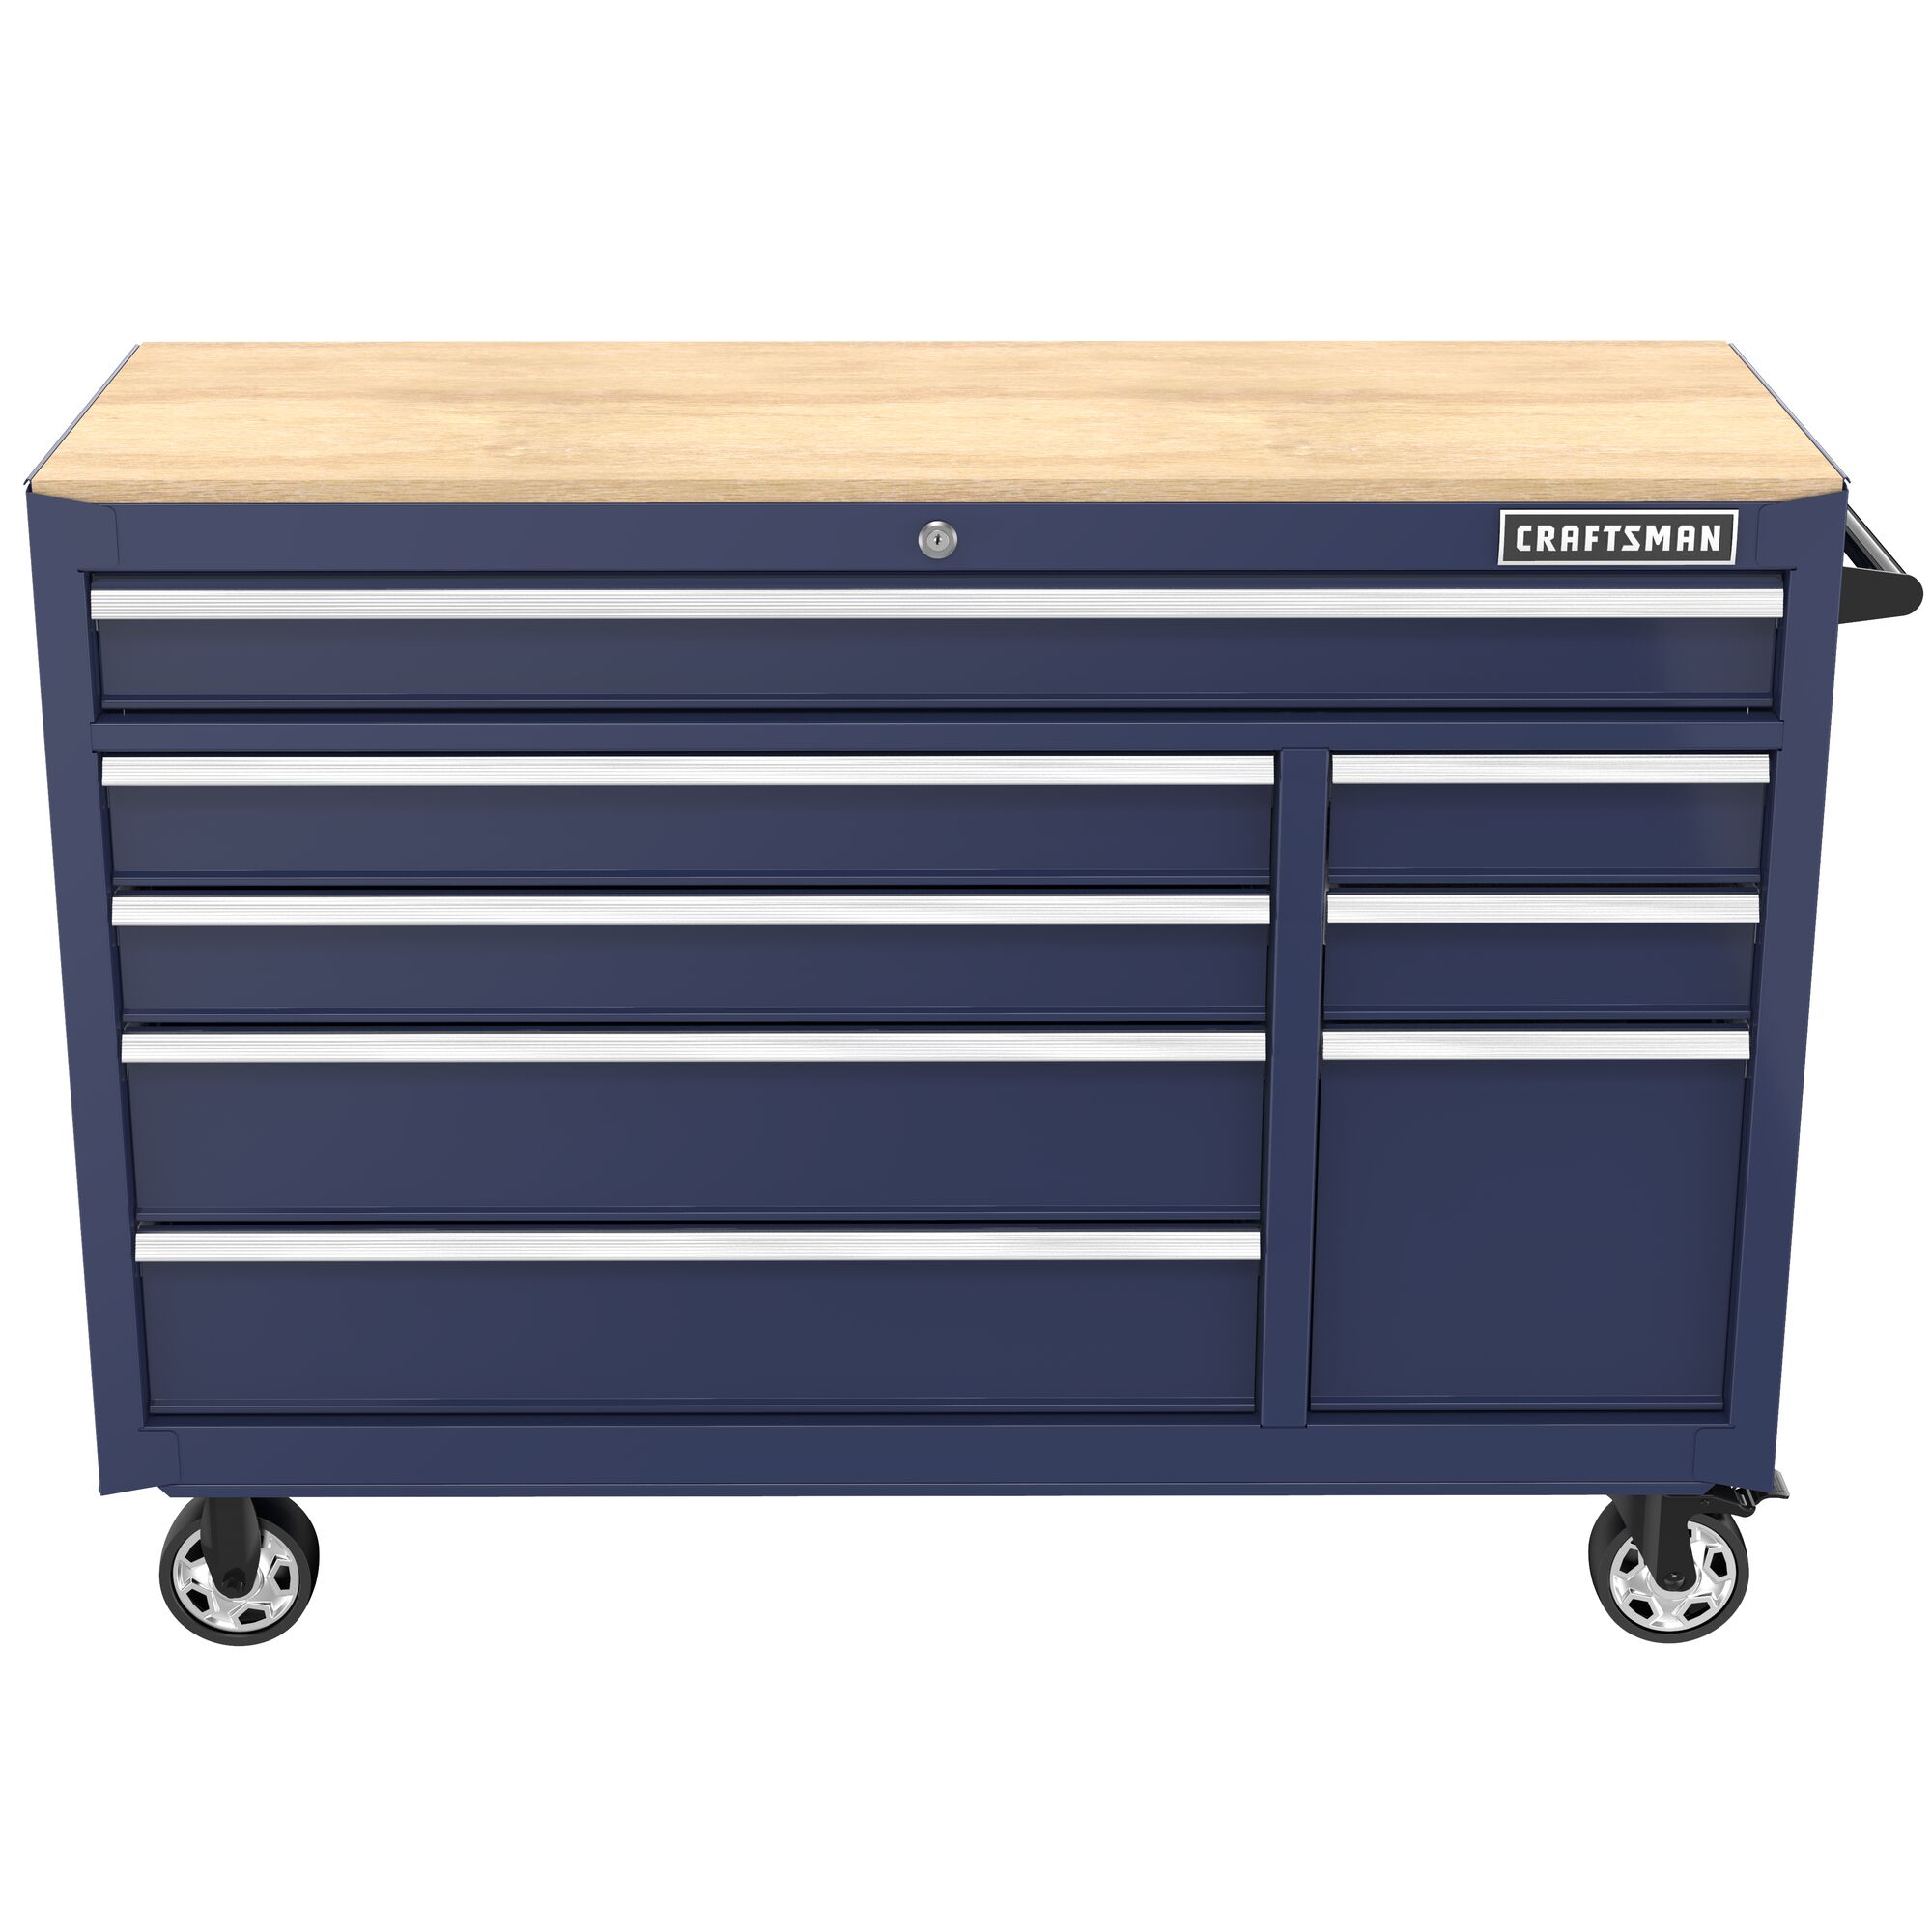 CRAFTSMAN S2000 Workstation in Midnight Blue with Wood Worktop front view